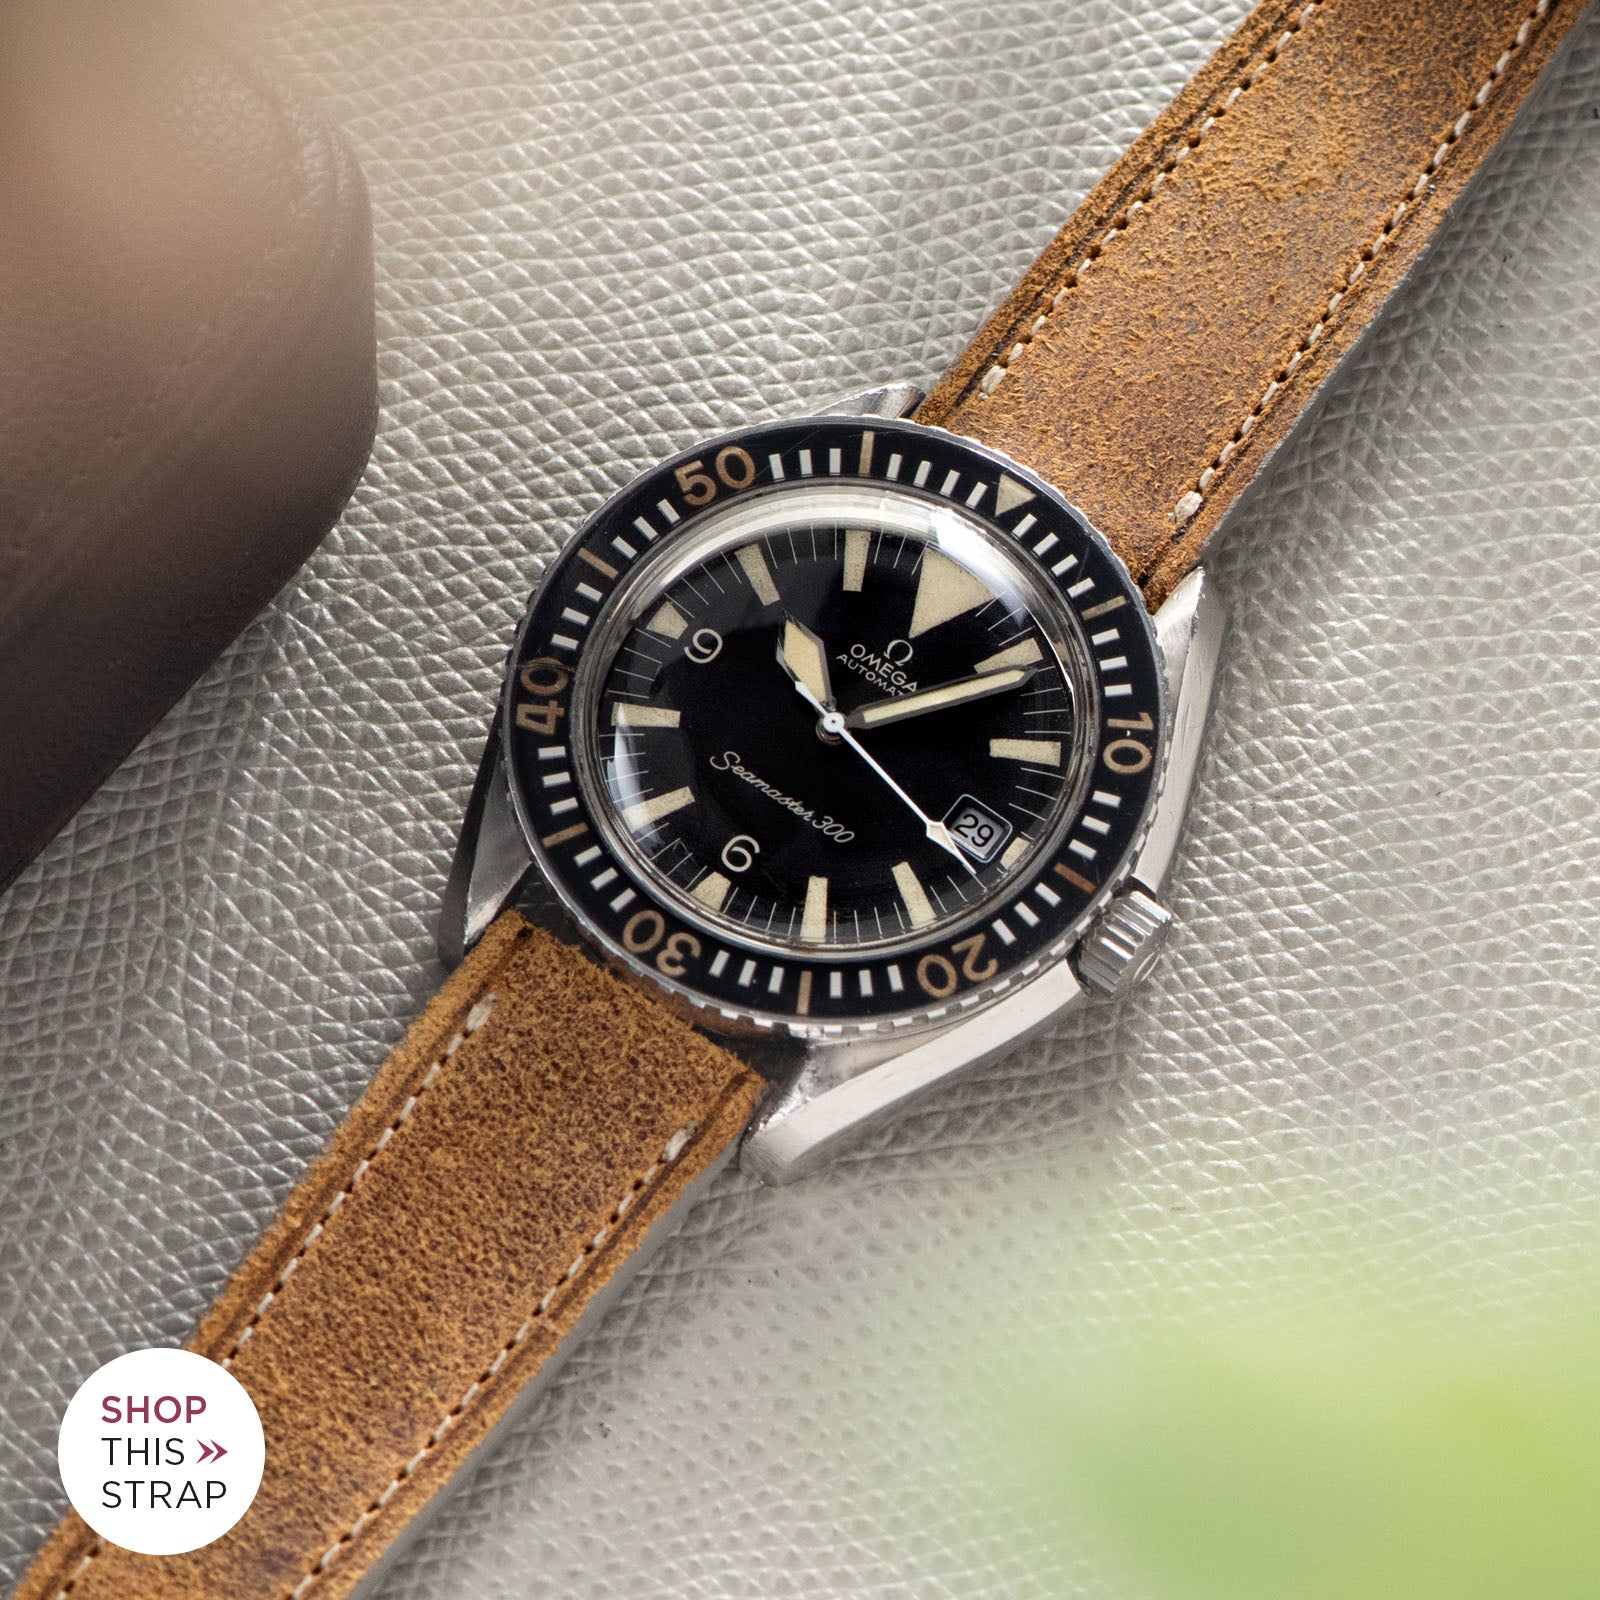 Bulang and Sons_Strap Guide_The omega SM 300 Seamaster_Le Marais Leather Watch Strap